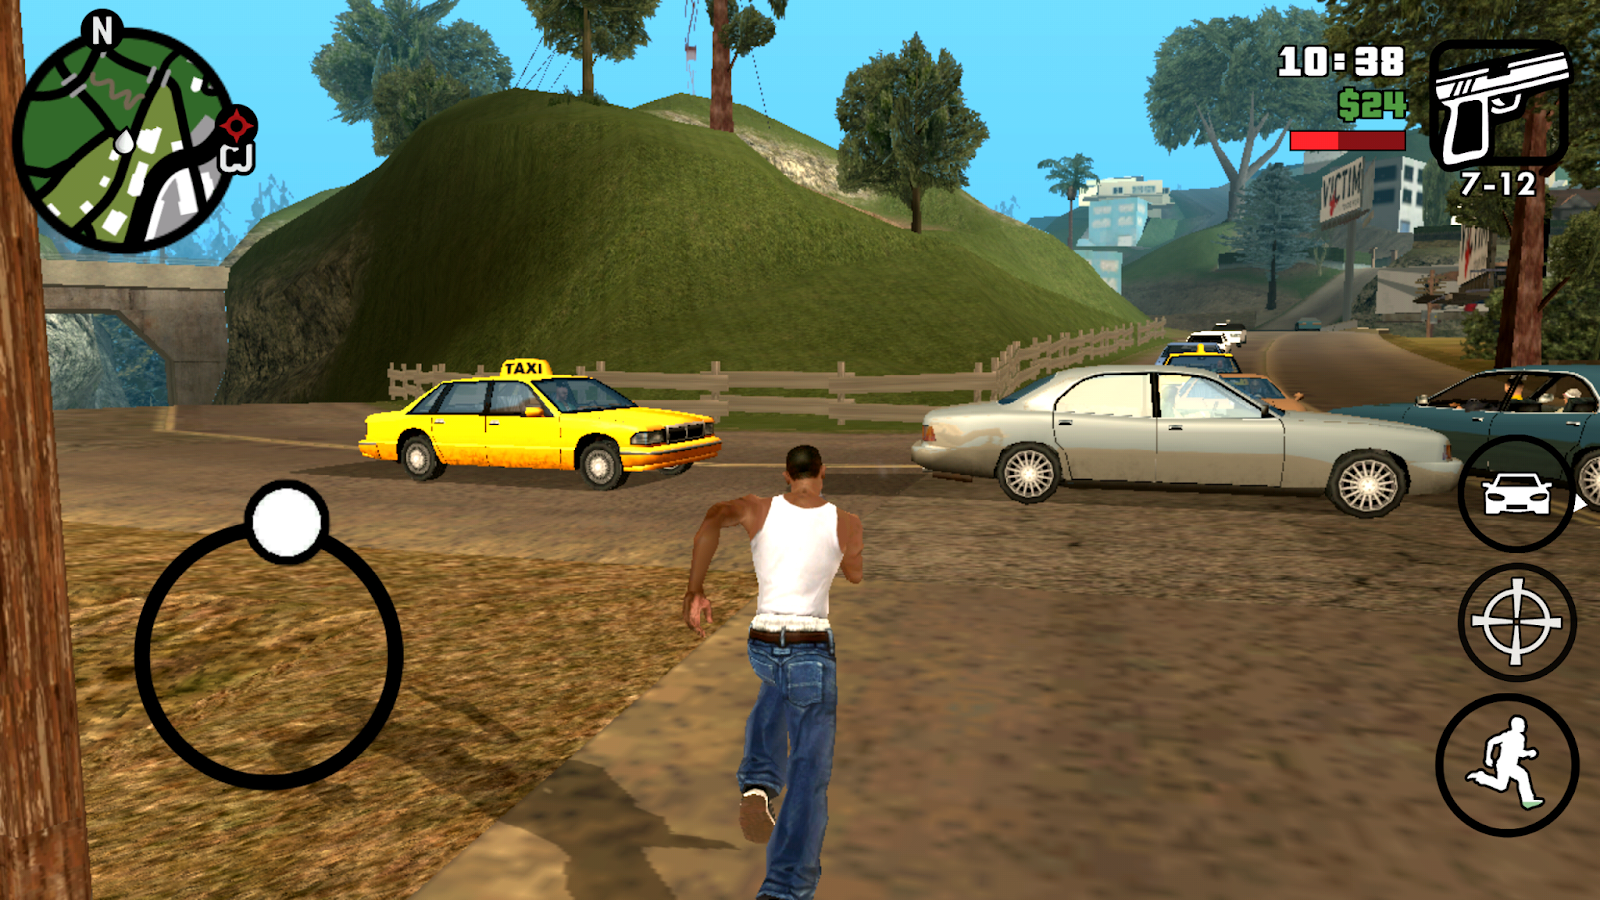 Gta San Andreas Apk Data Free Download For Android 2018